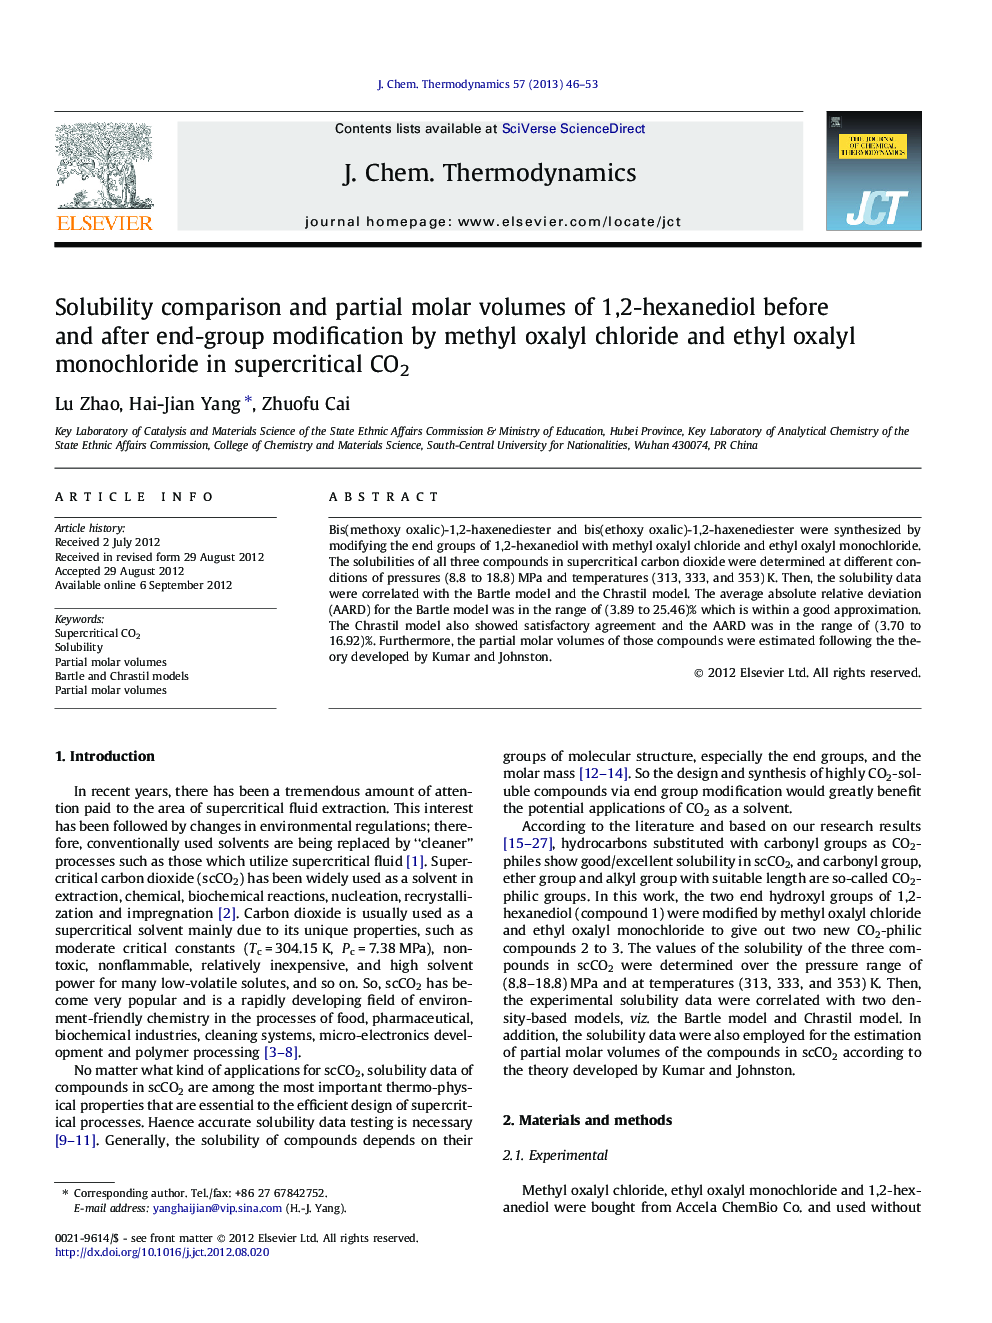 Solubility comparison and partial molar volumes of 1,2-hexanediol before and after end-group modification by methyl oxalyl chloride and ethyl oxalyl monochloride in supercritical CO2